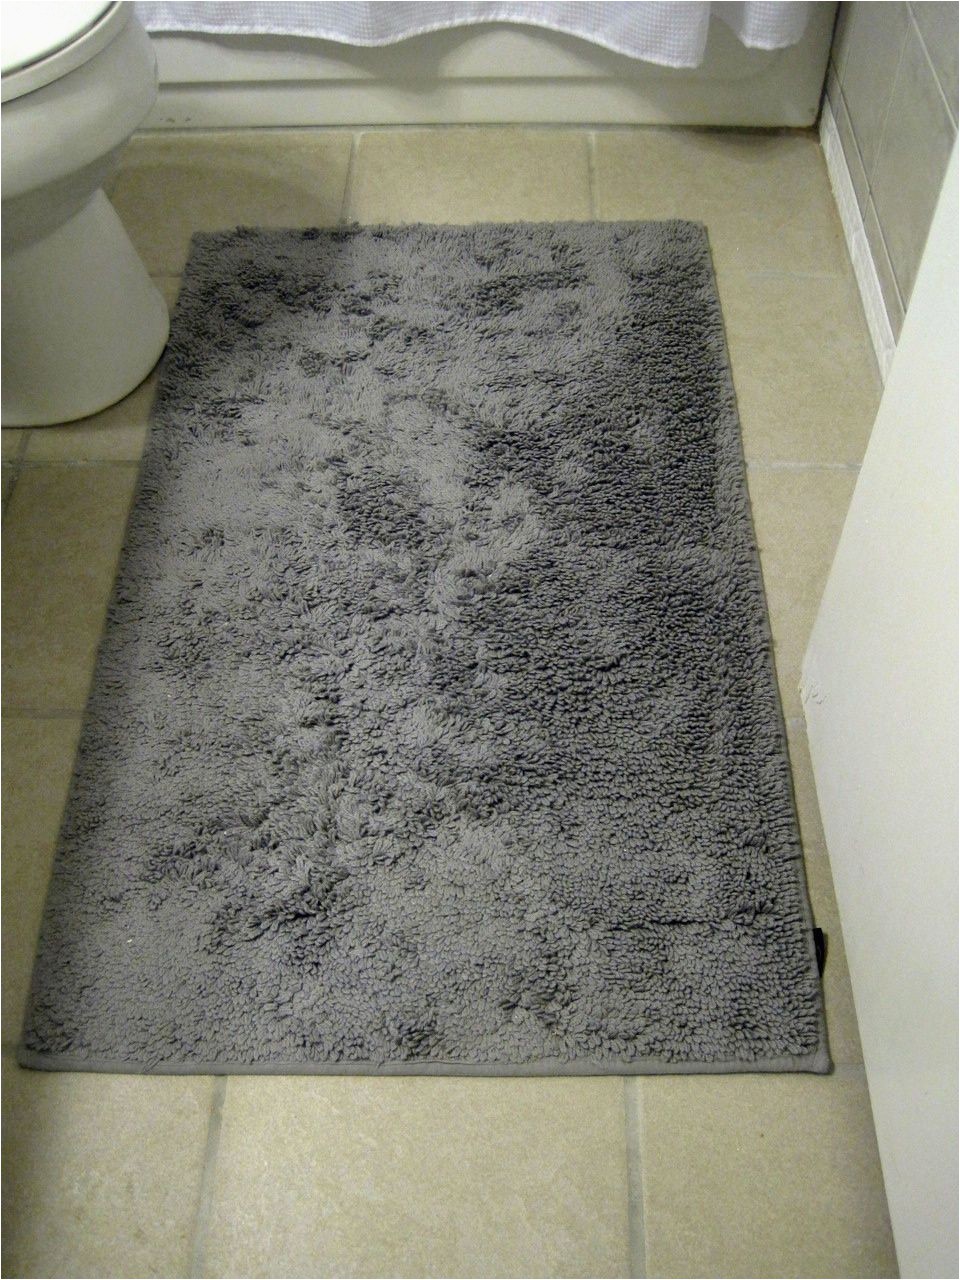 Crate and Barrel Bathroom Rugs 14 Remarkable Crate and Barrel Bath Rugs Designer